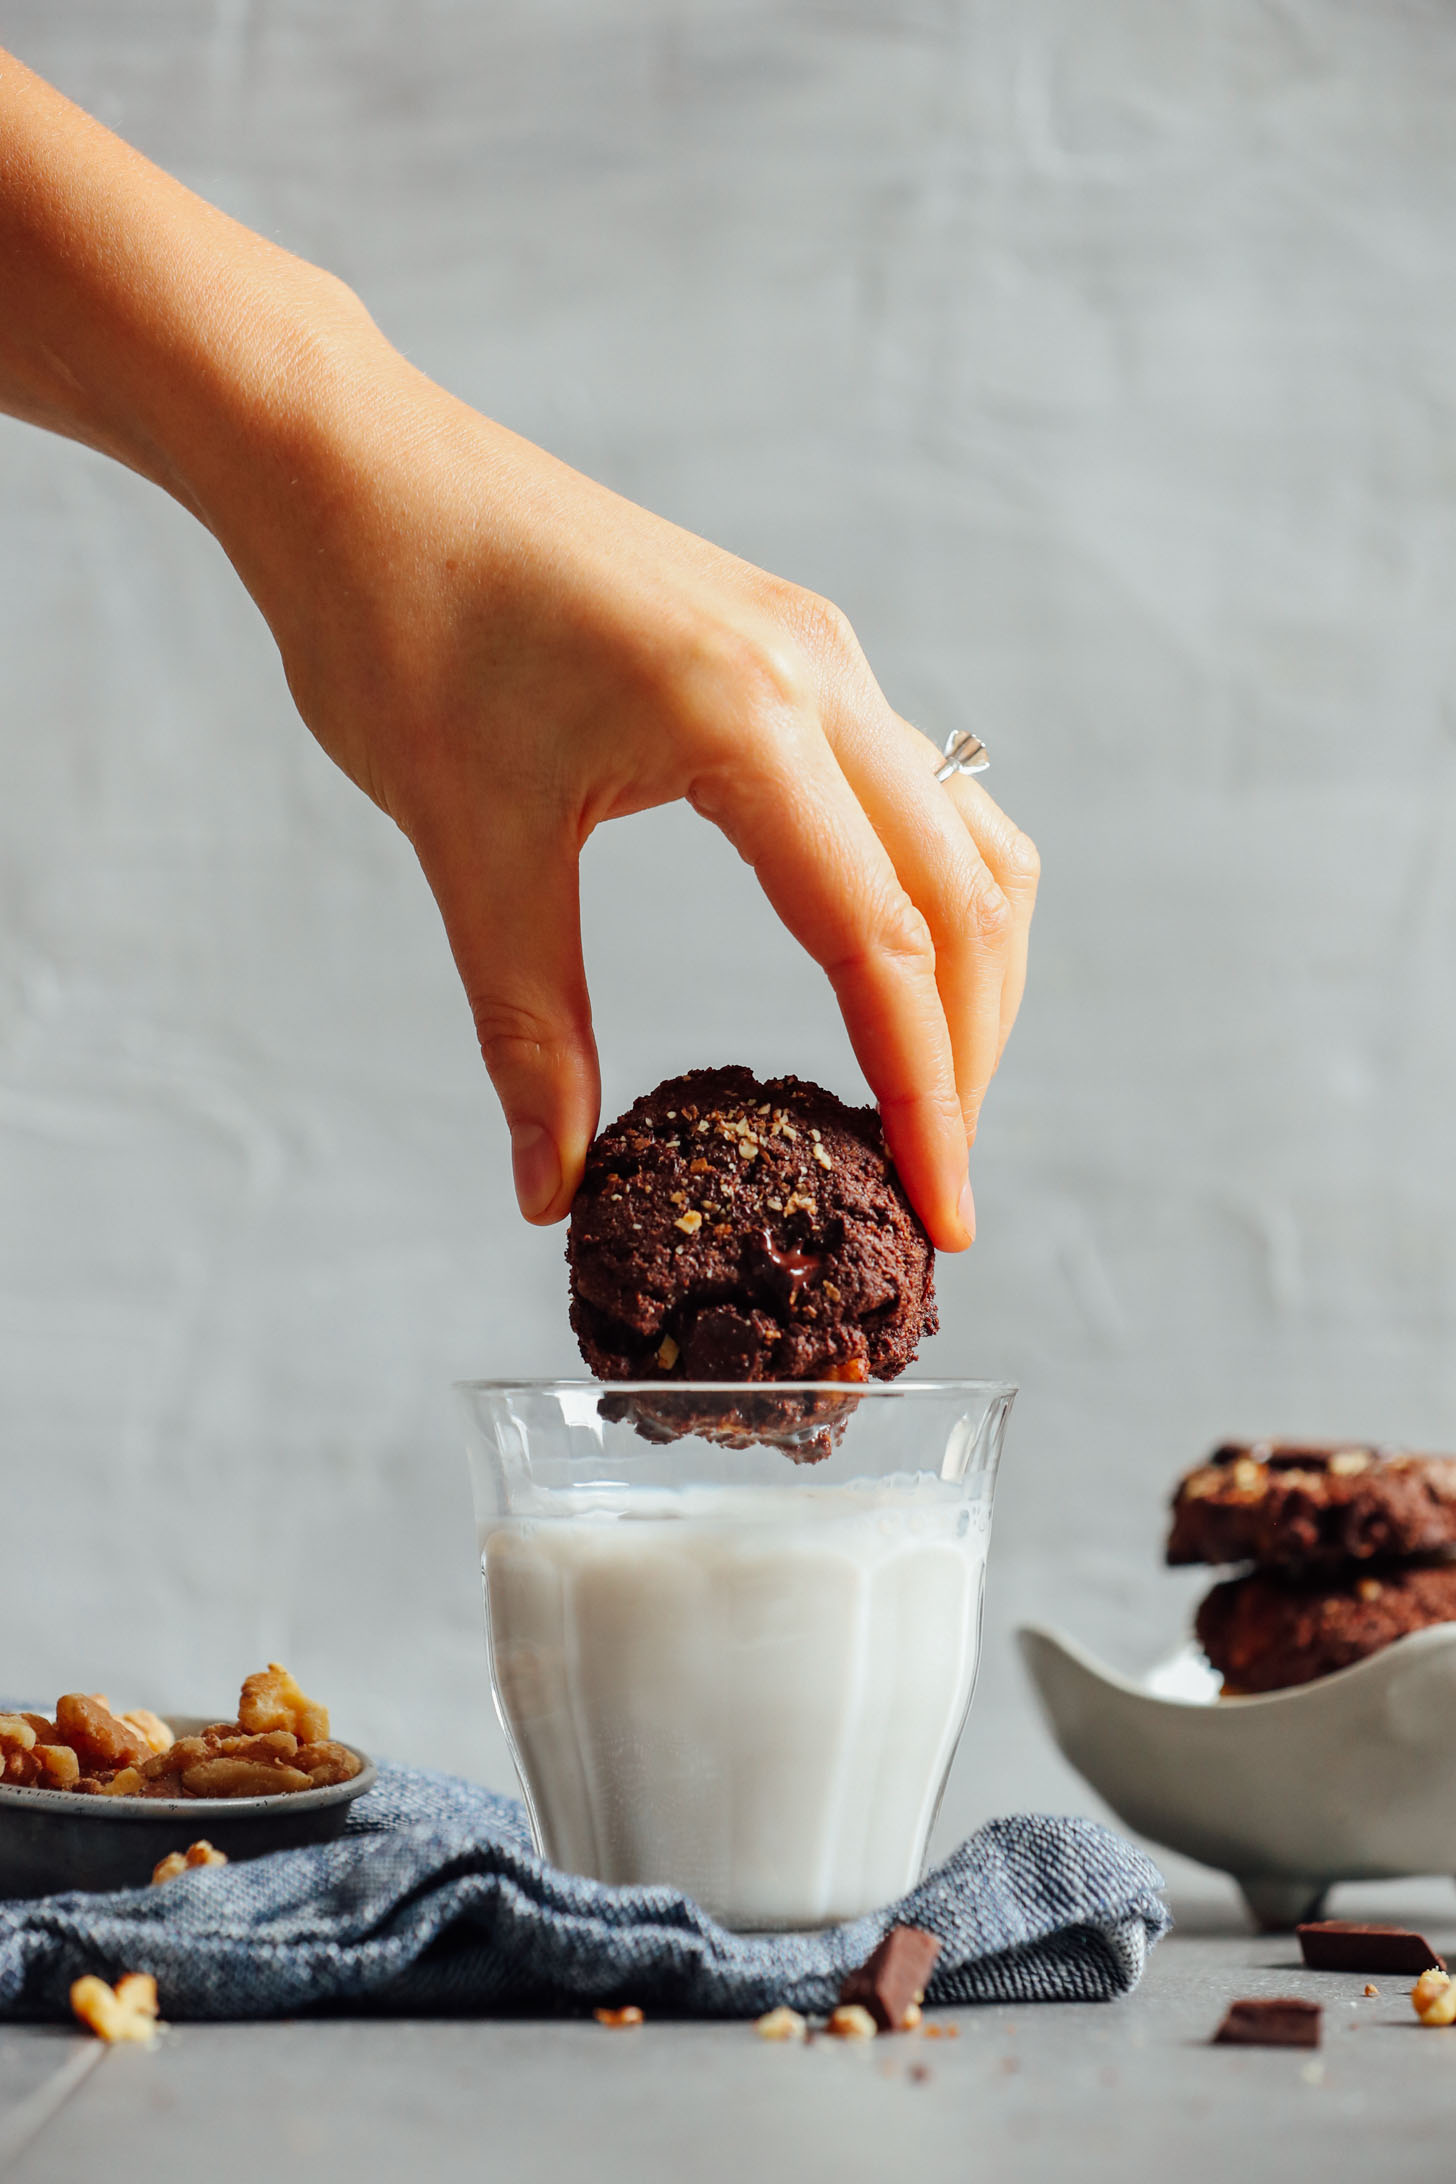 Dipping a decadent Vegan Brownie Cookie into a glass of almond milk